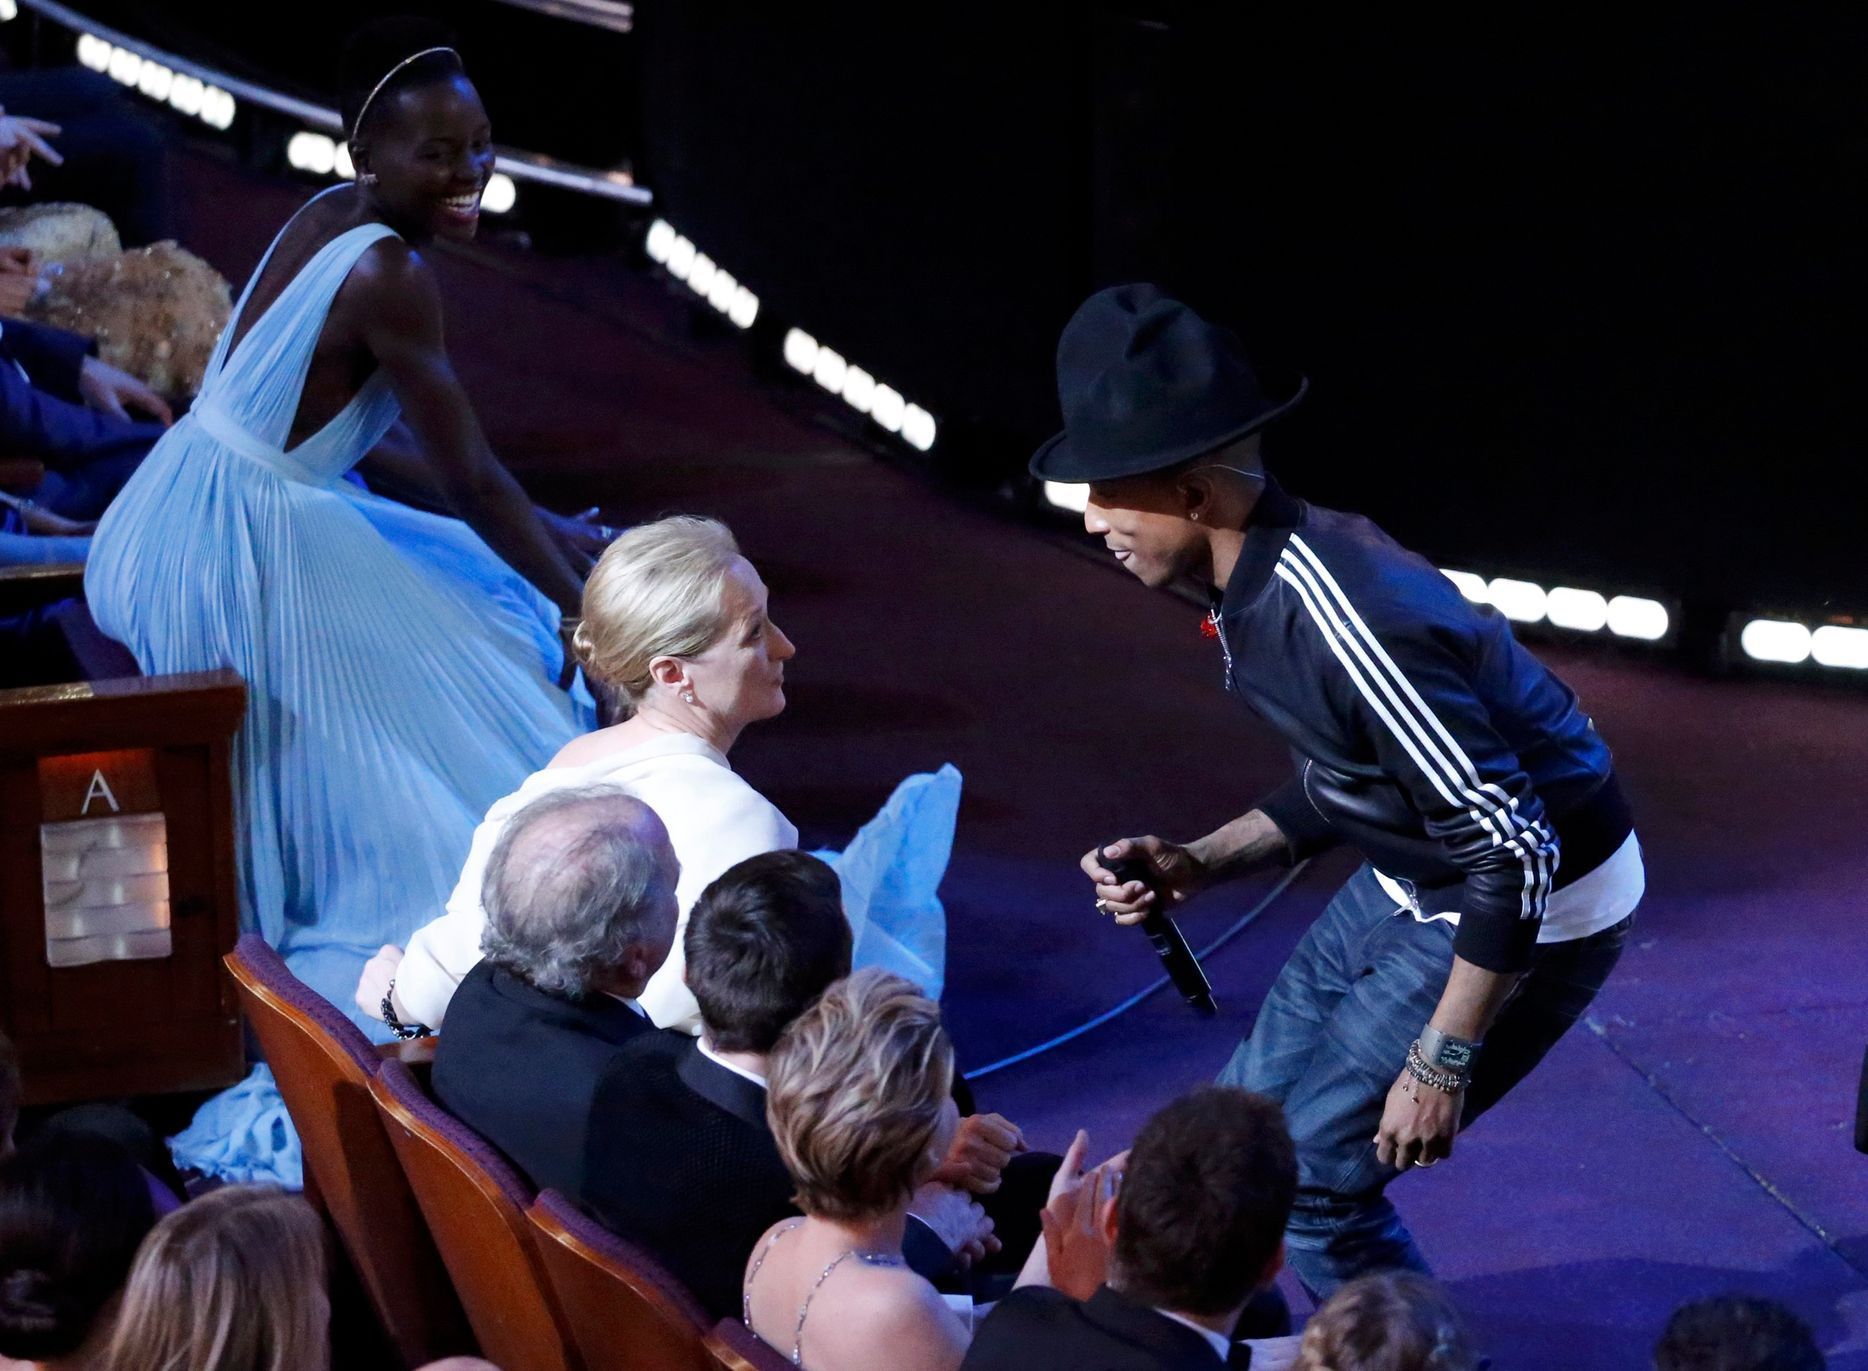 Pharrell Williams performs in front of actress Meryl Streep at the 86th Academy Awards in Hollywood